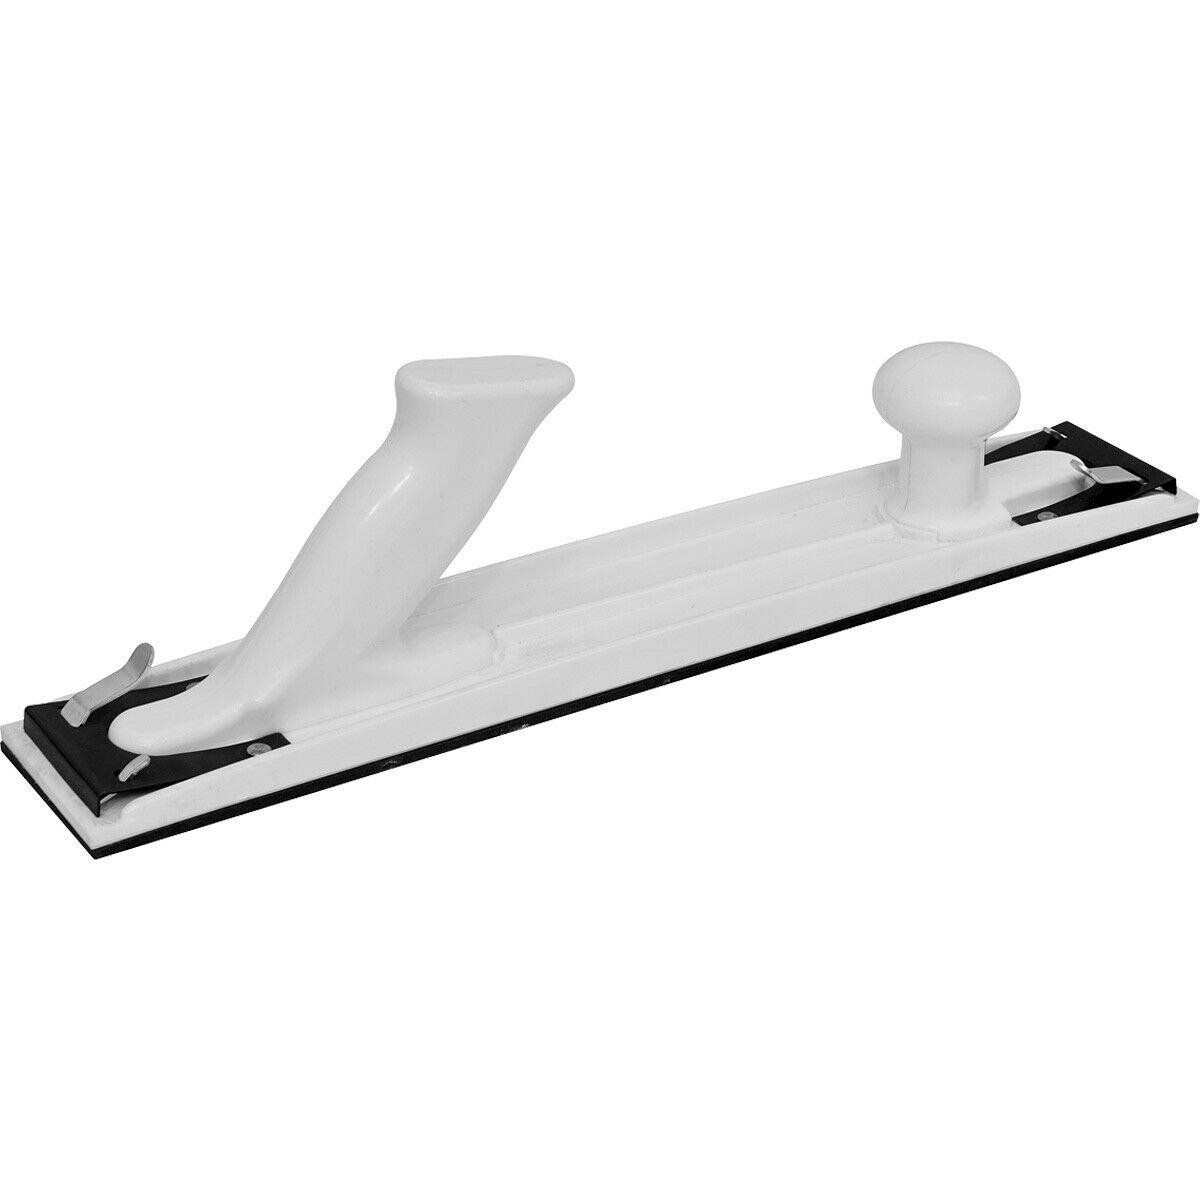 Long Board Sanding Block - 70mm x 407mm - Hook and Loop Surface - Resilient